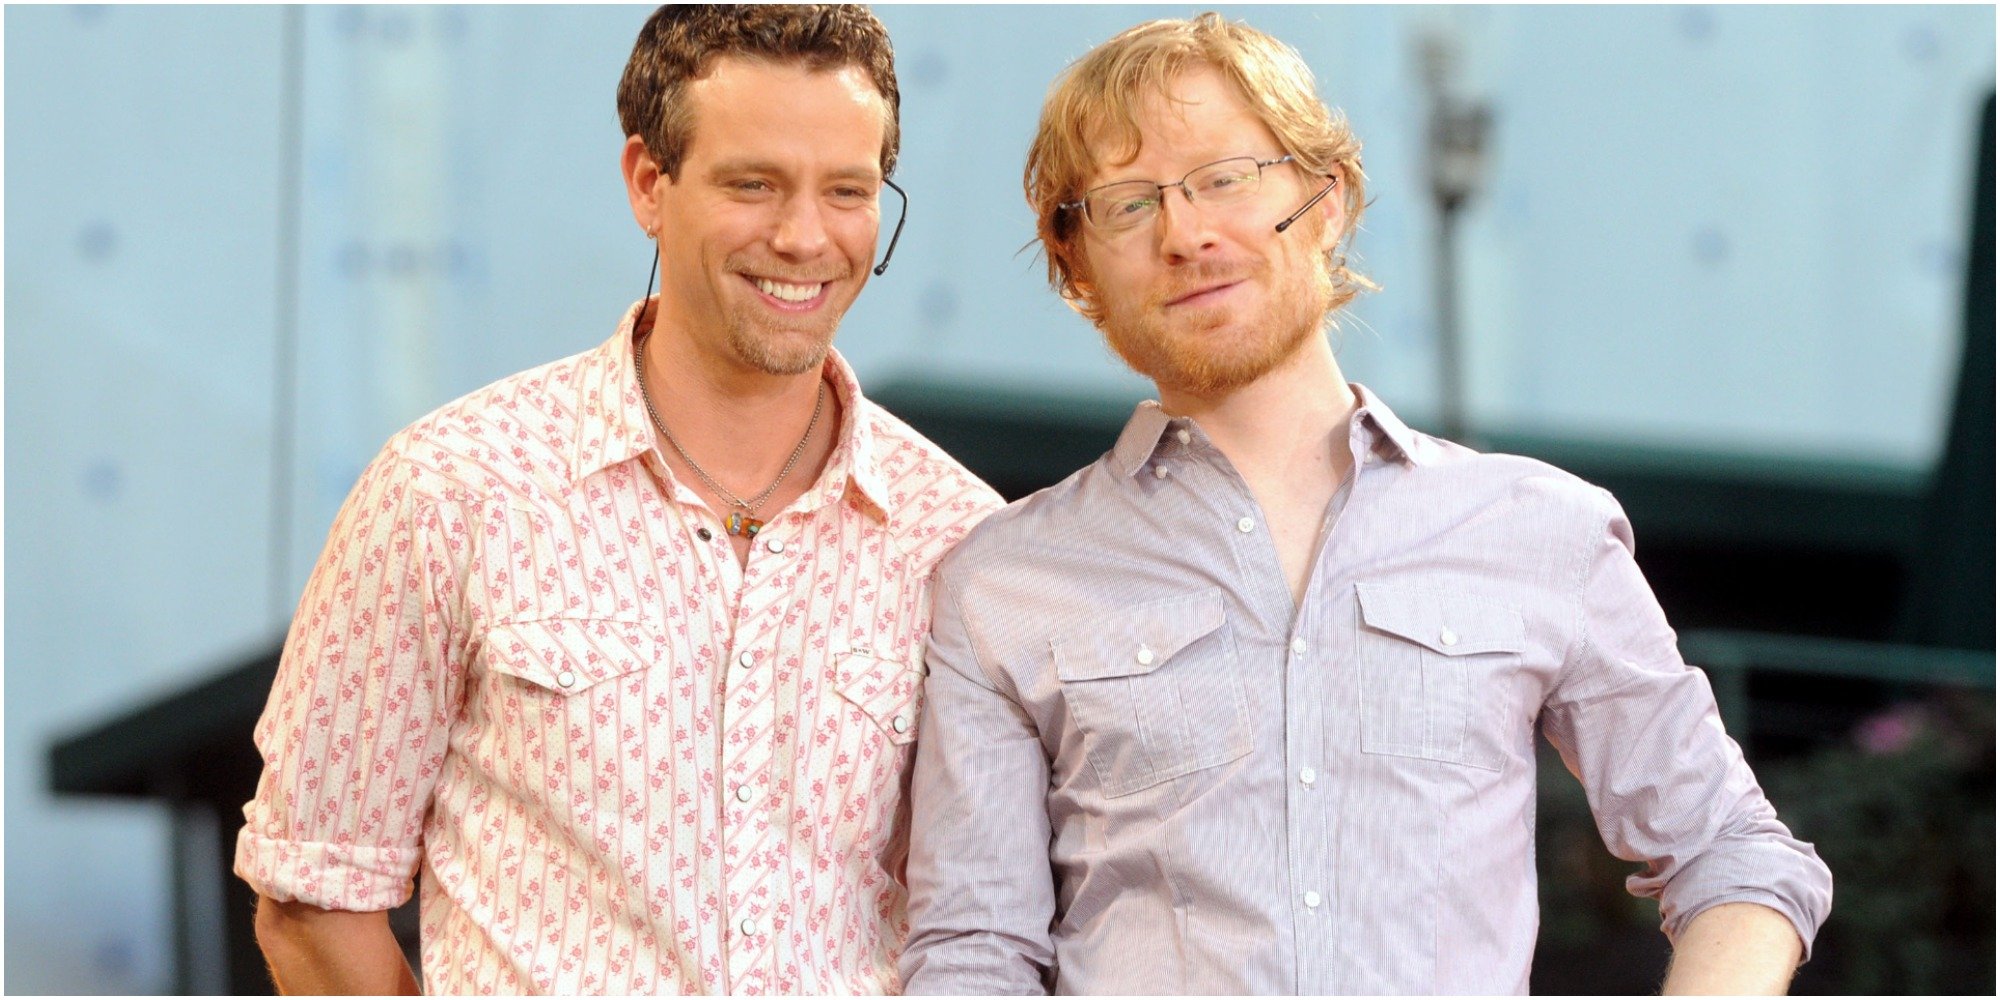 "Rent" alums Adam Pascal and Anthony Rapp will also present at the Tony Awards.